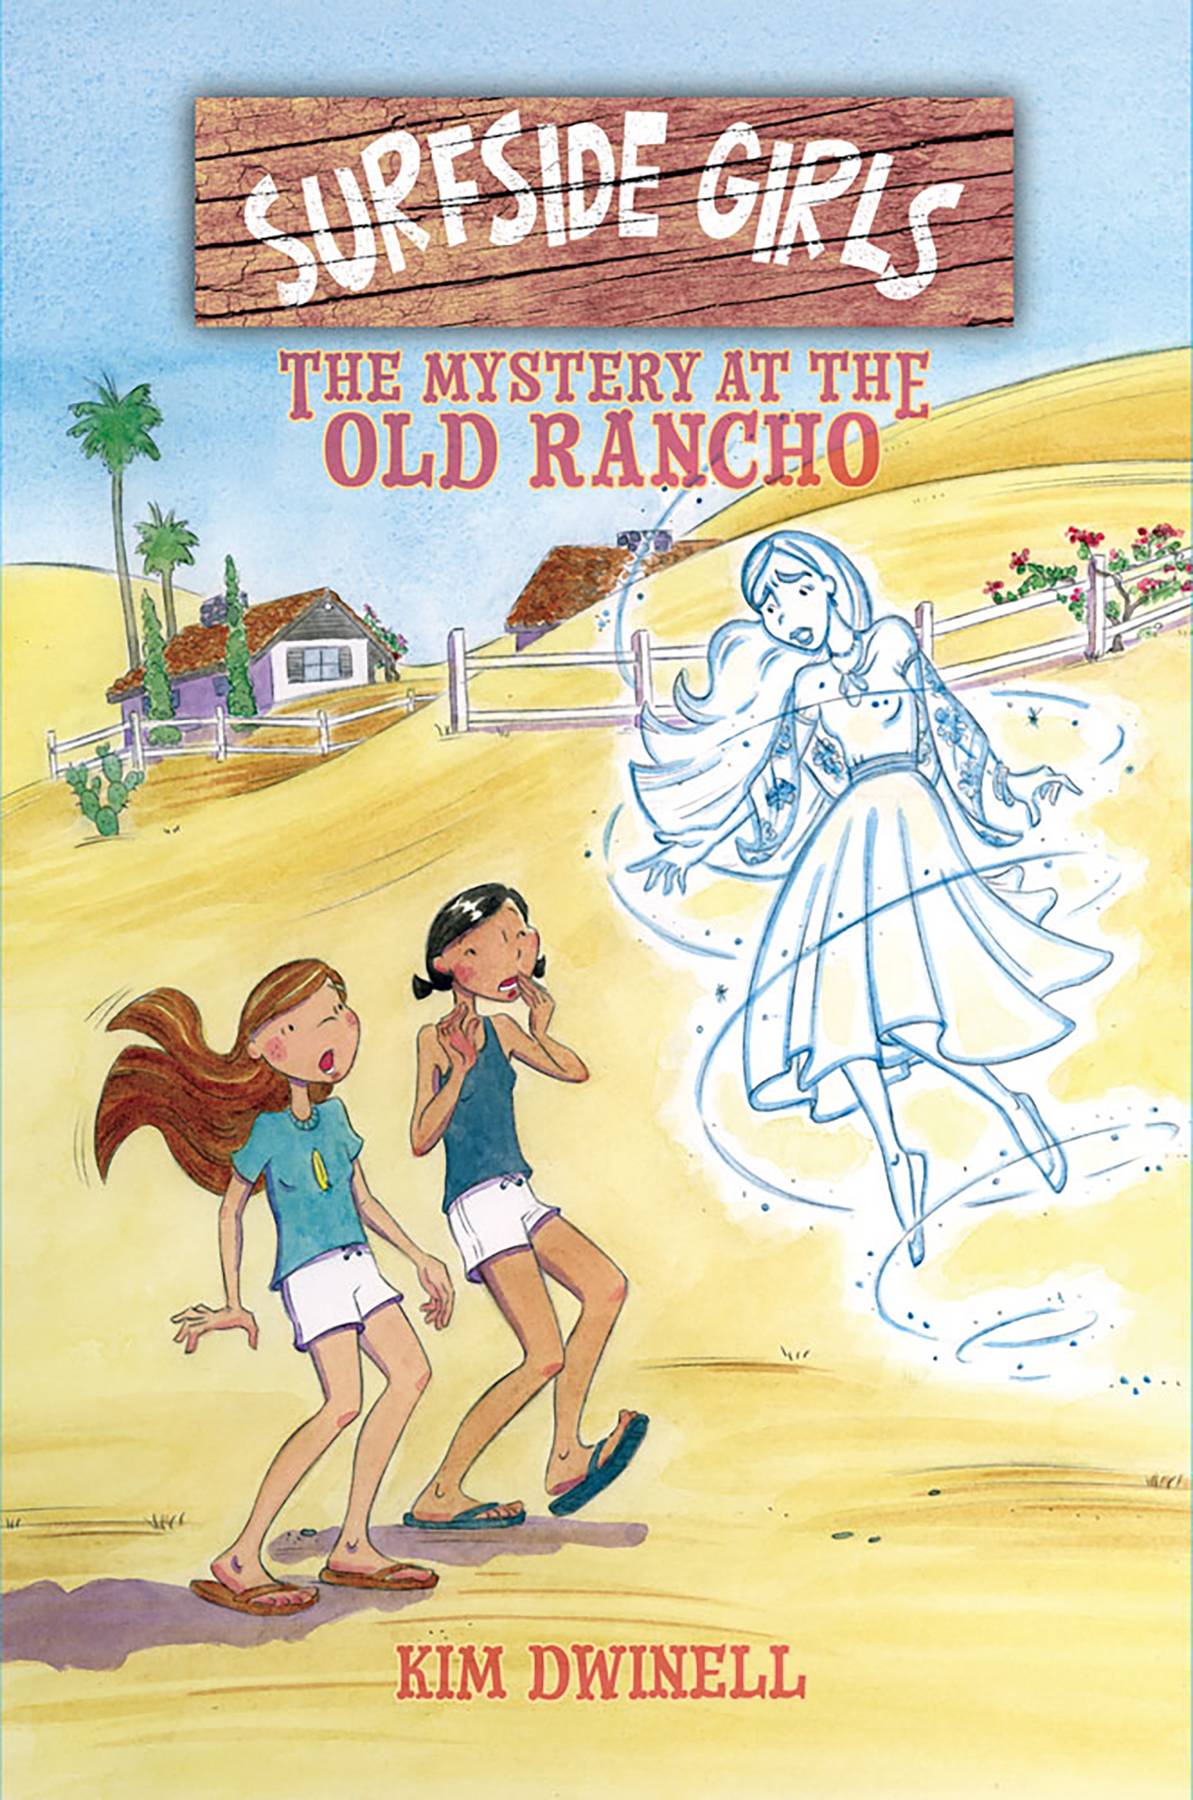 Surfside Girls Graphic Novel Volume 2 Mystery At Old Rancho